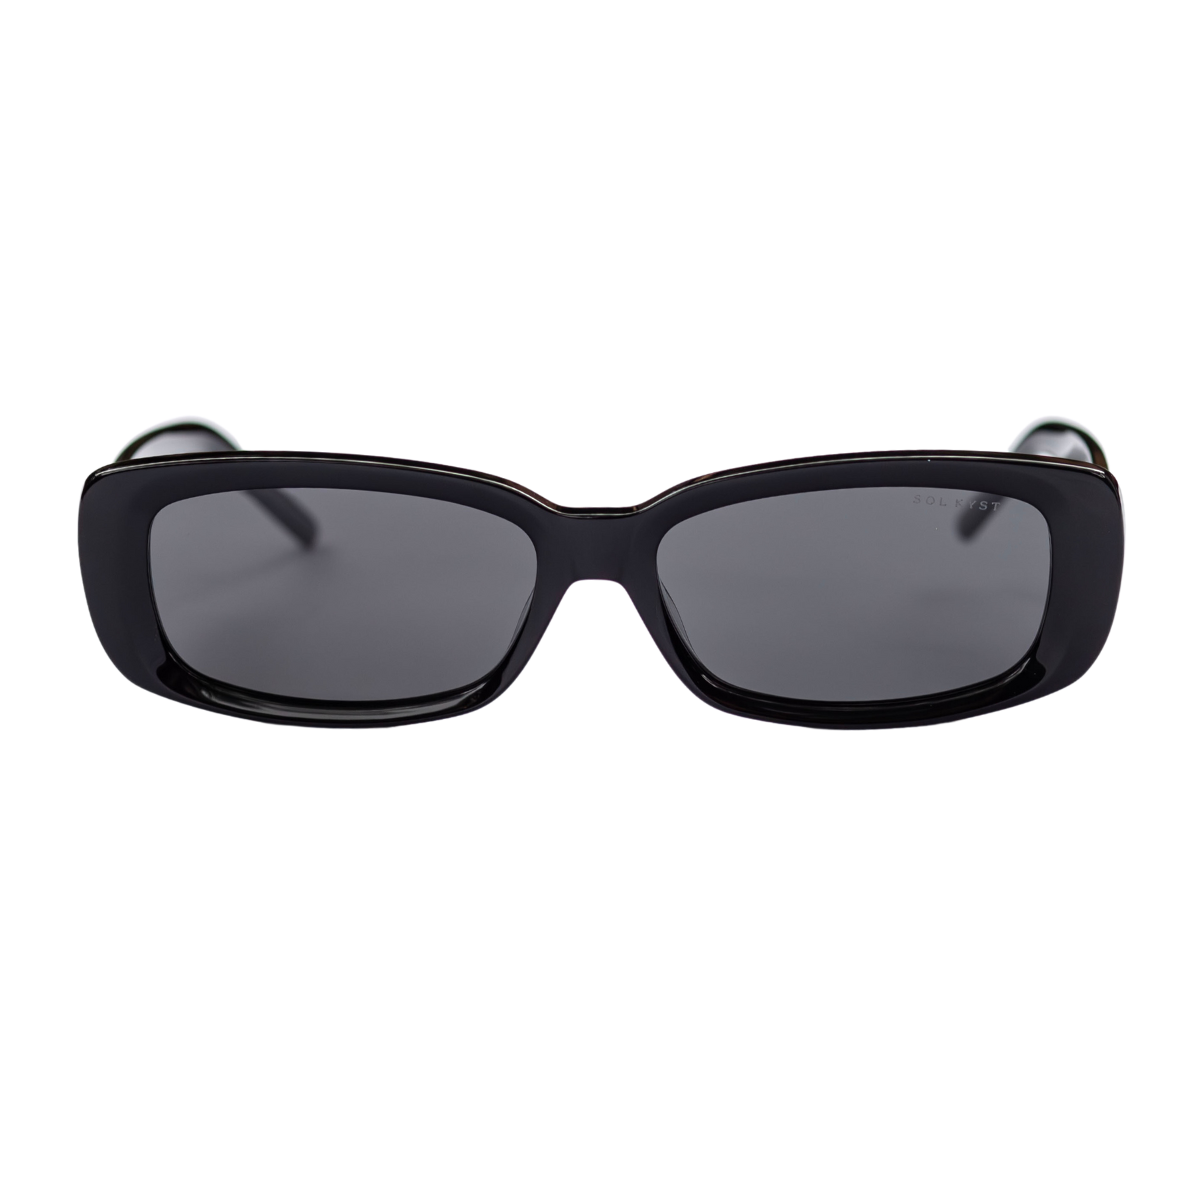 Sol Kyst sunglasses, designed to fit and flatter, midi sunglasses, wide face petite, slightly wider than standard